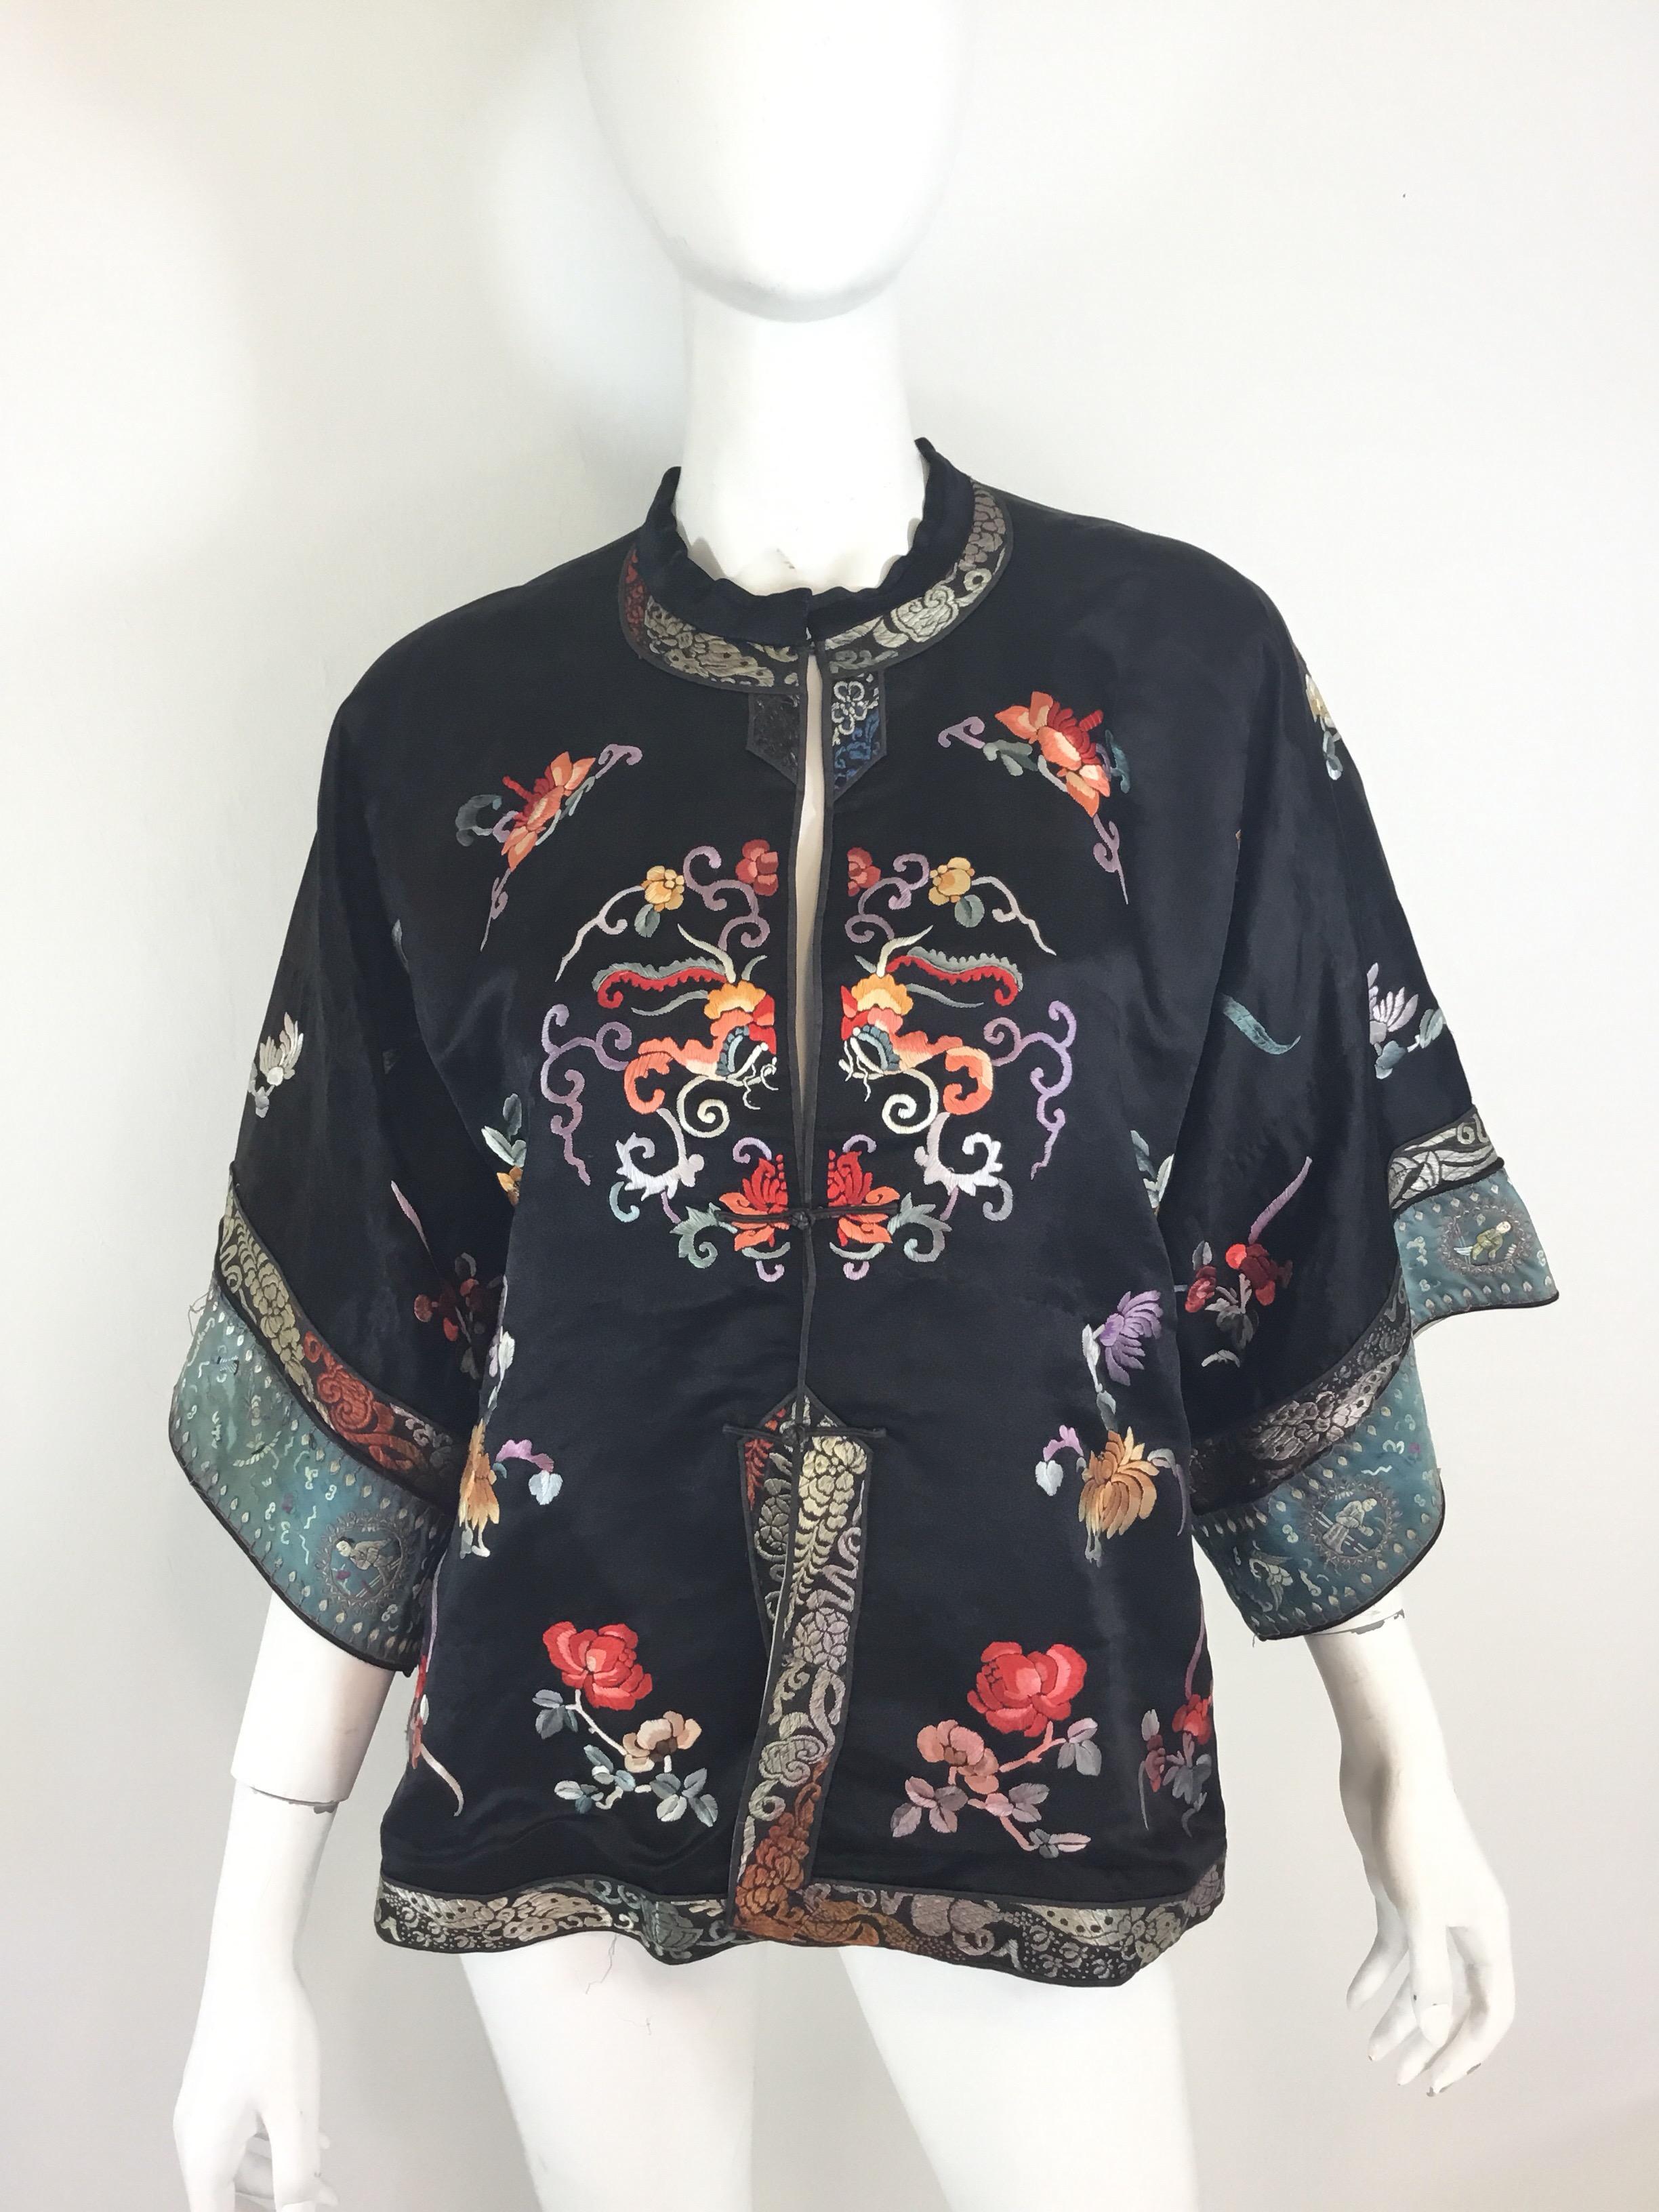 Chinese Silk Jacket, circa 1920 featured in black with multicolor embroidering throughout. Jacket has a hook and button fastenings. Measurements are as follows:

Bust 46”, sleeves 8.5” (dolman style sleeve), length 26”